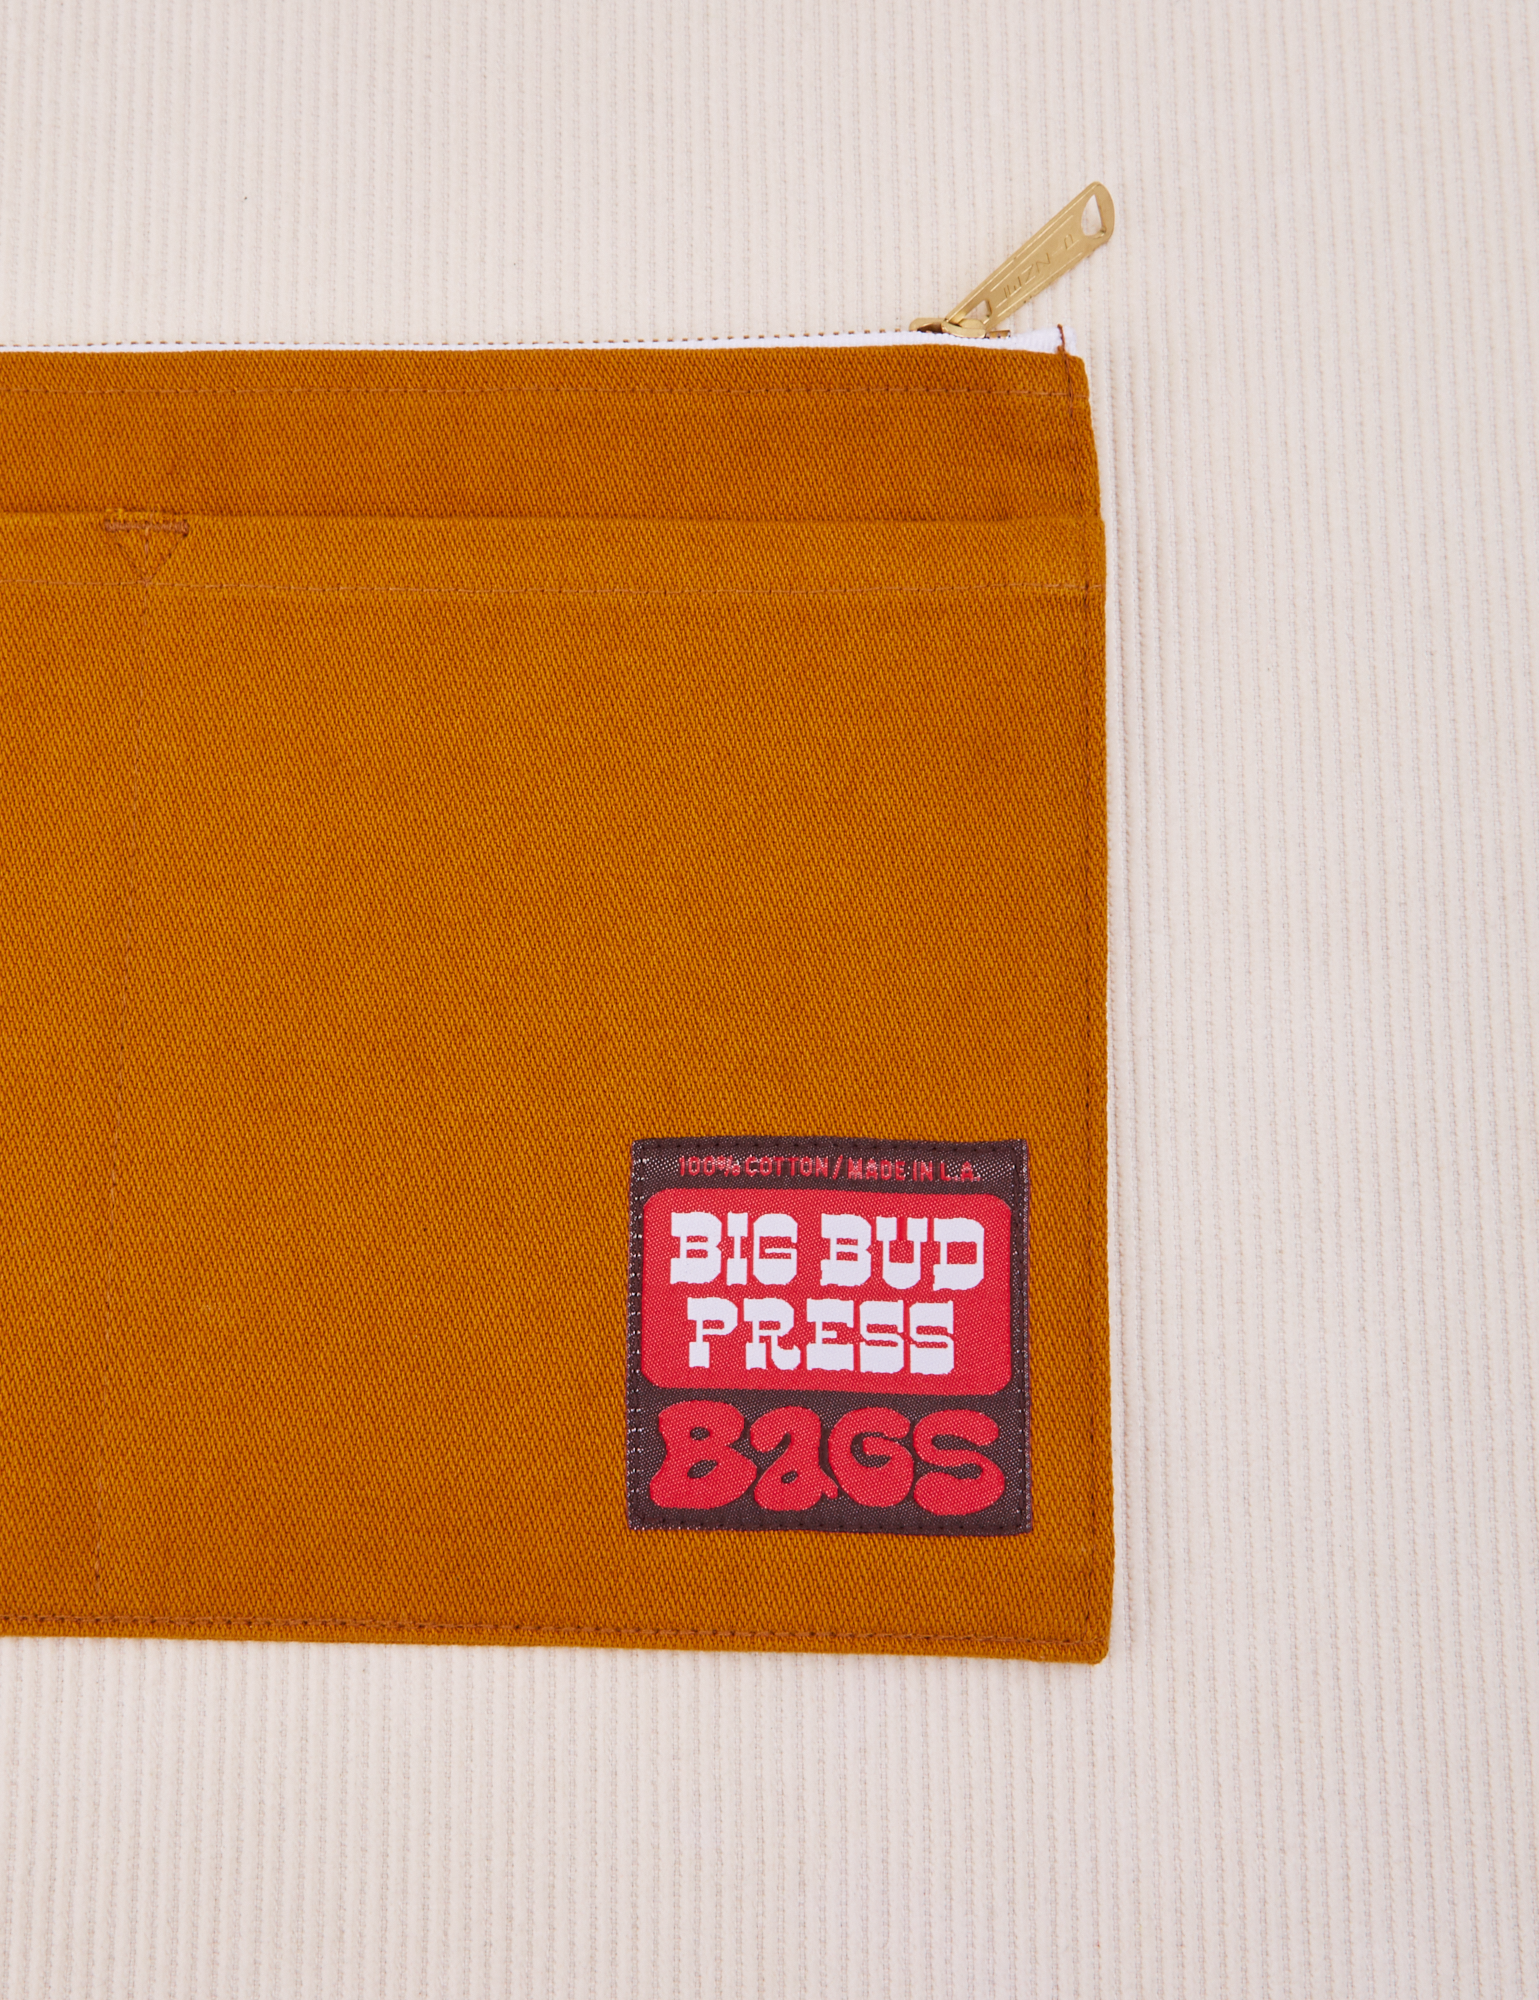 Big Pouch in Spicy Mustard with big bud press label in red and brown